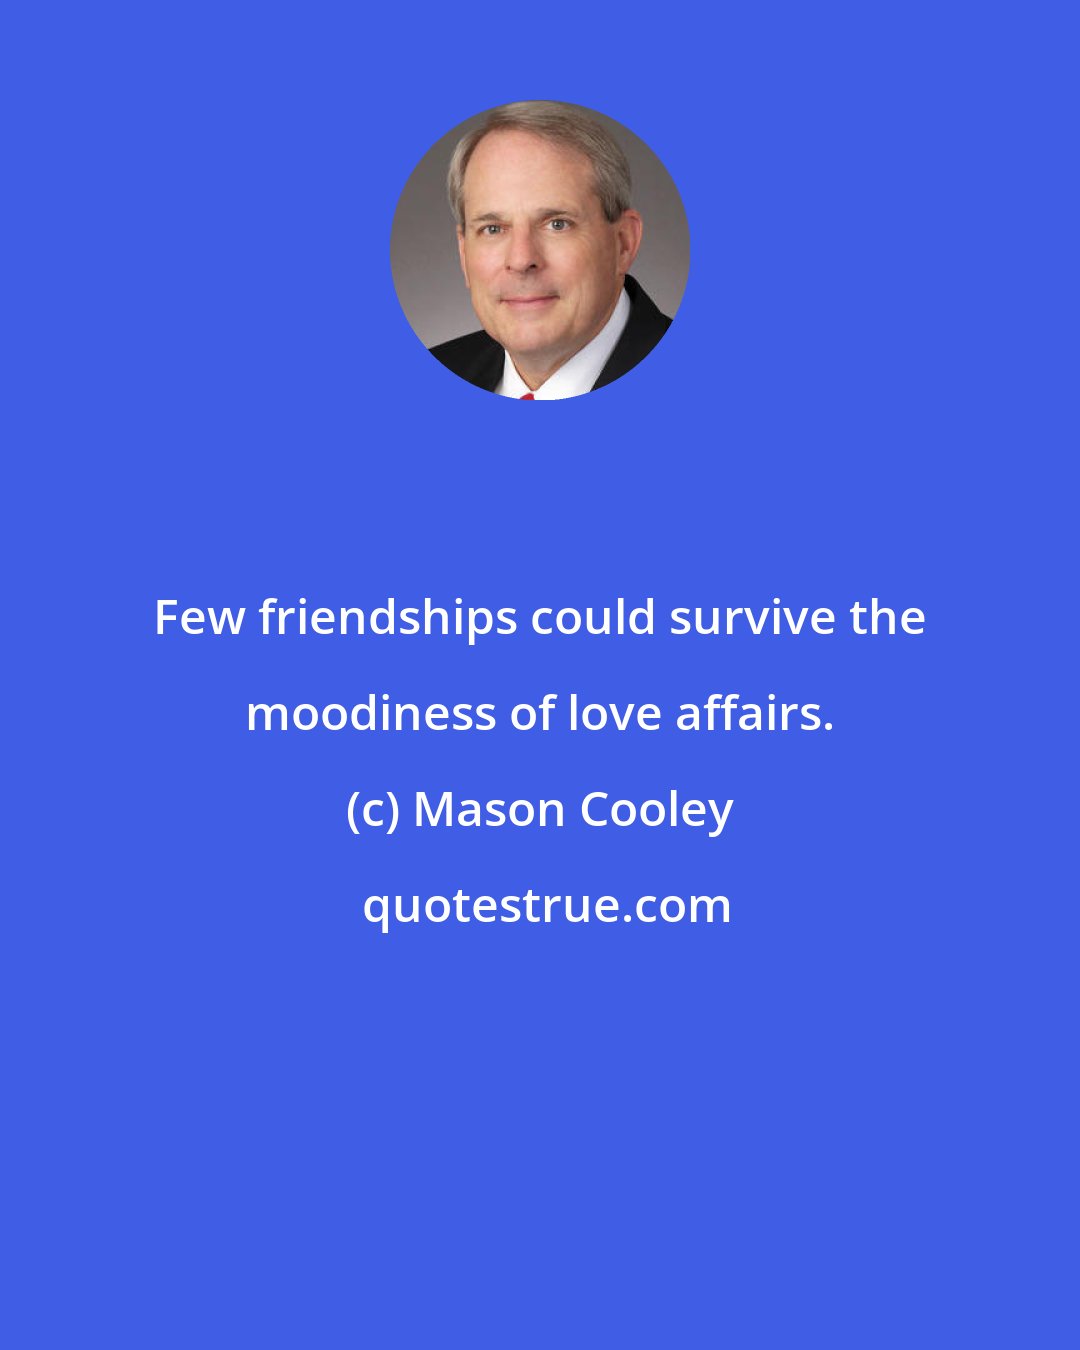 Mason Cooley: Few friendships could survive the moodiness of love affairs.